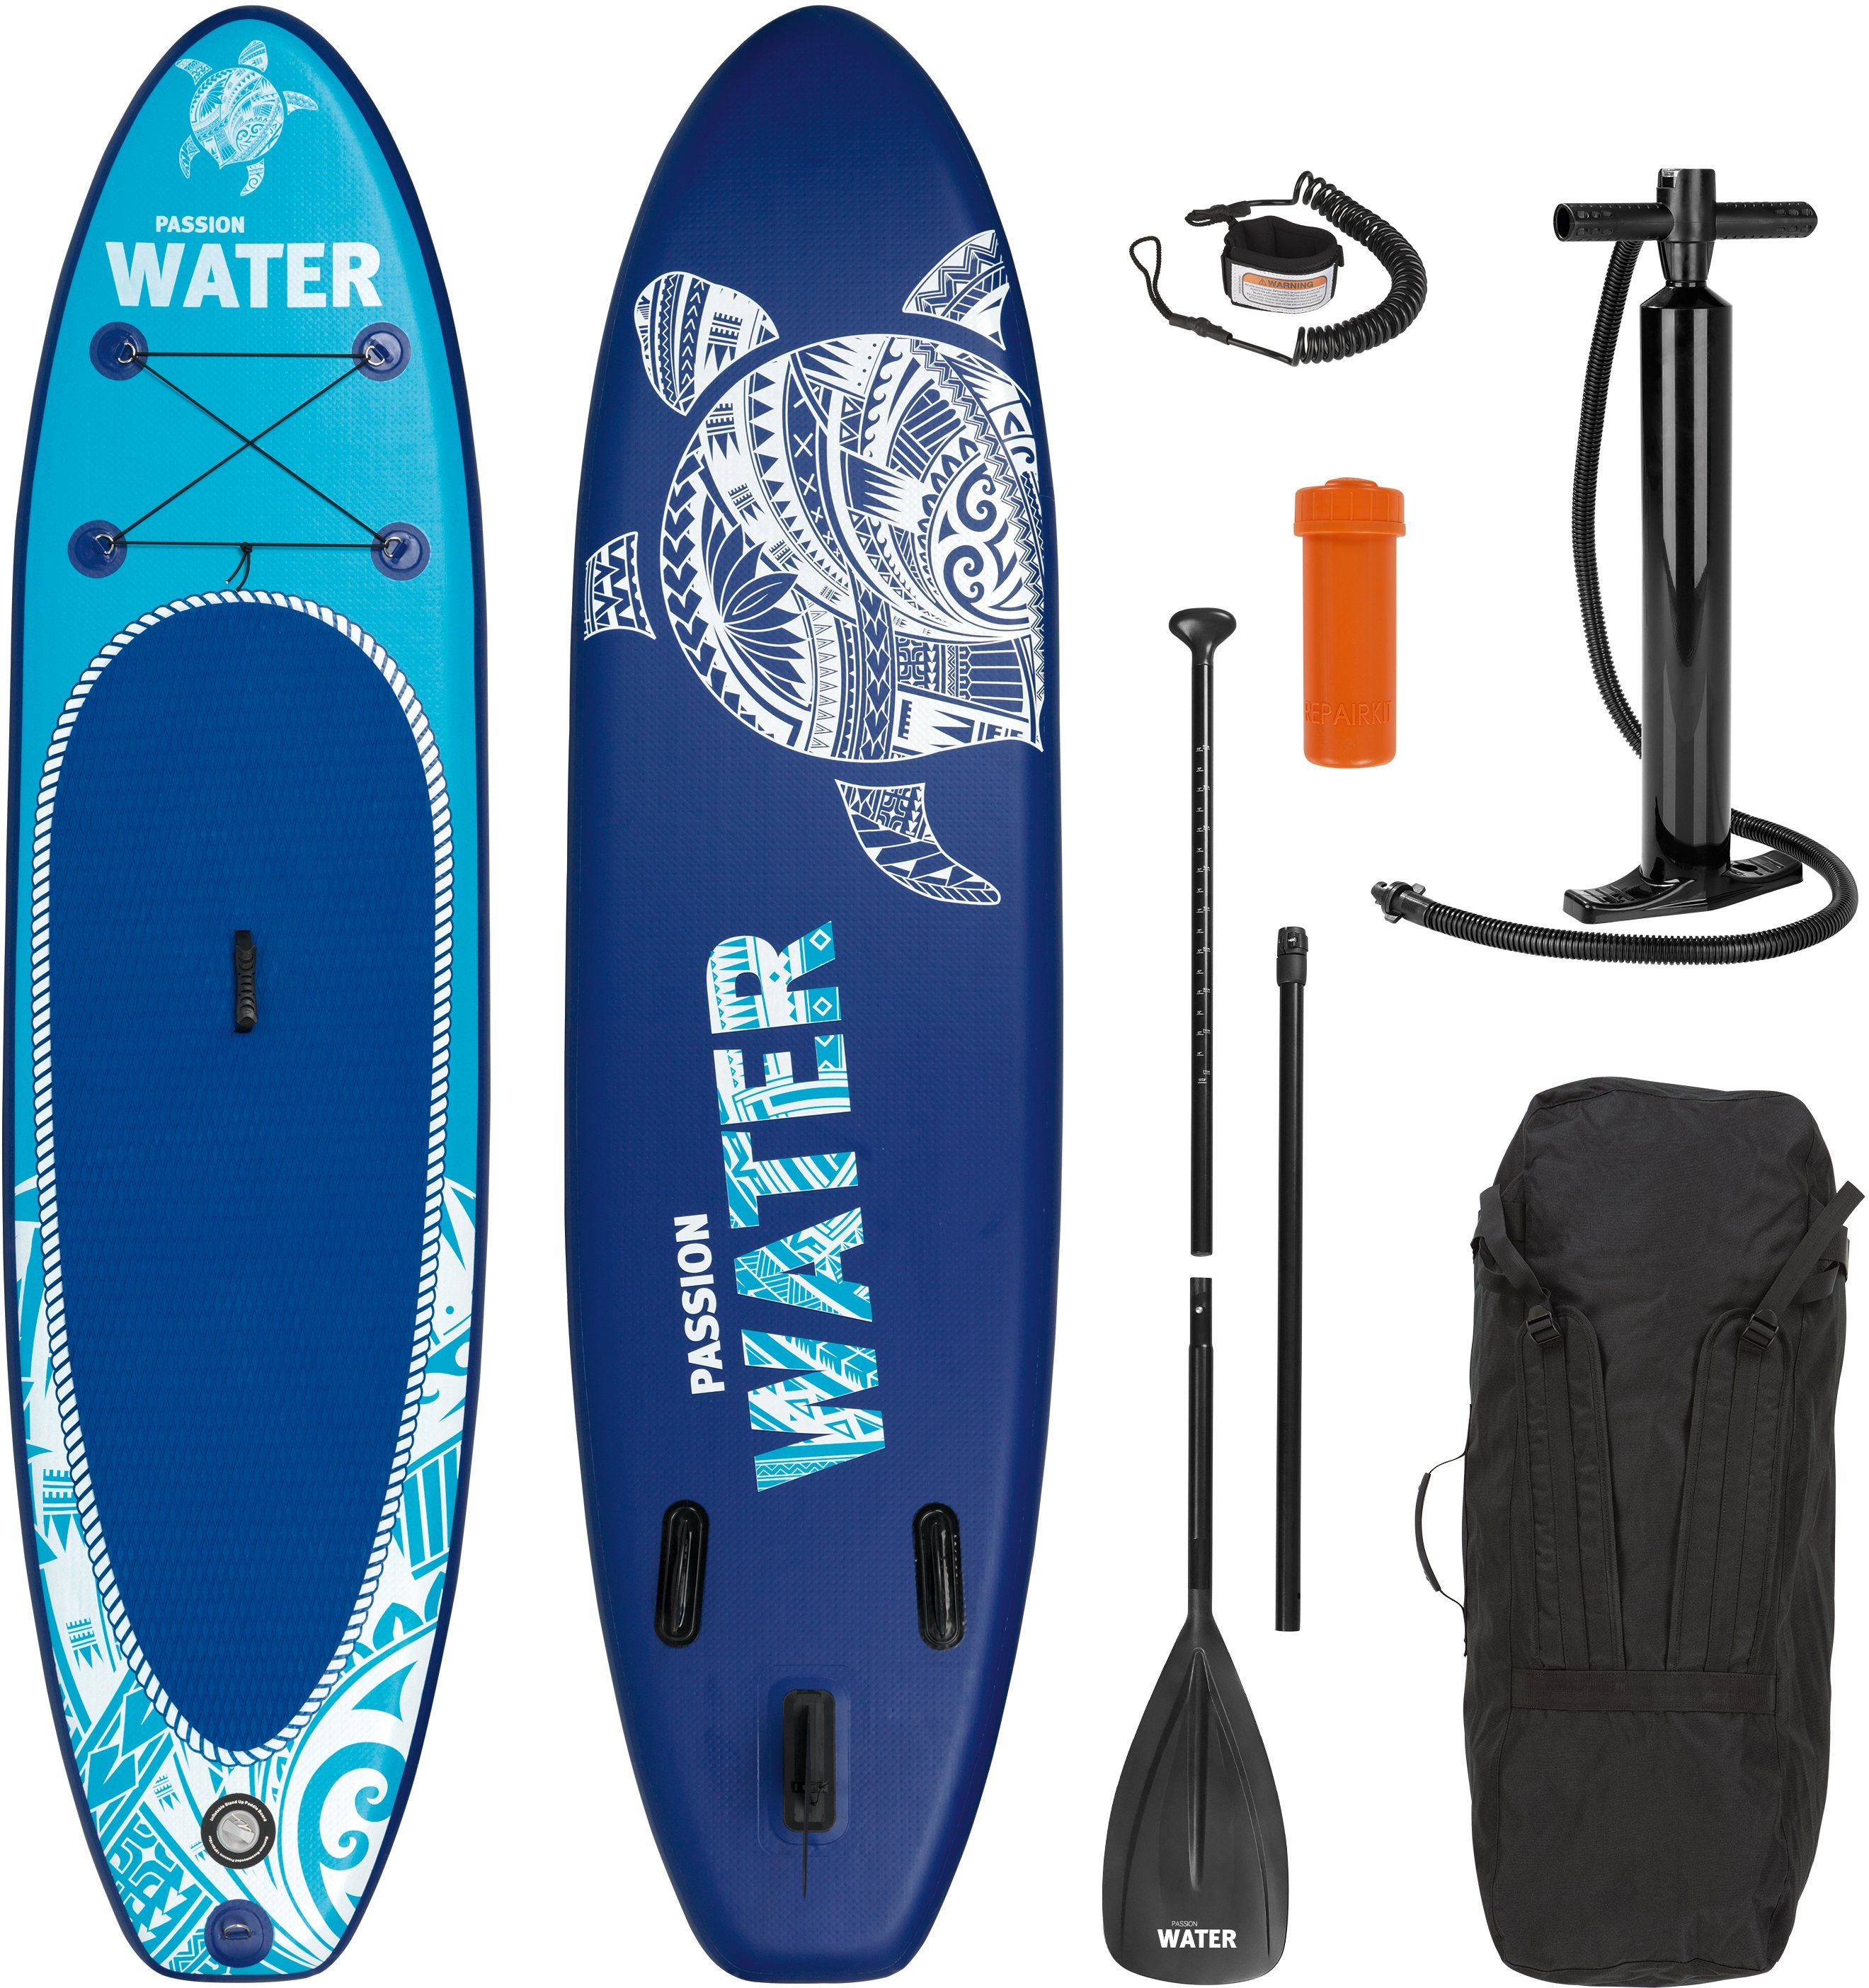 MAXXMEE Inflatable cm, SUP Set, Board Stand-Up Paddle up SUP-Board, 110kg, Mit Finnen, Gepäck-Spanngurt und Paddle-Board Komplett Board 300 Stand Sicherungsschlaufe inkl. Paddling Paddel 3